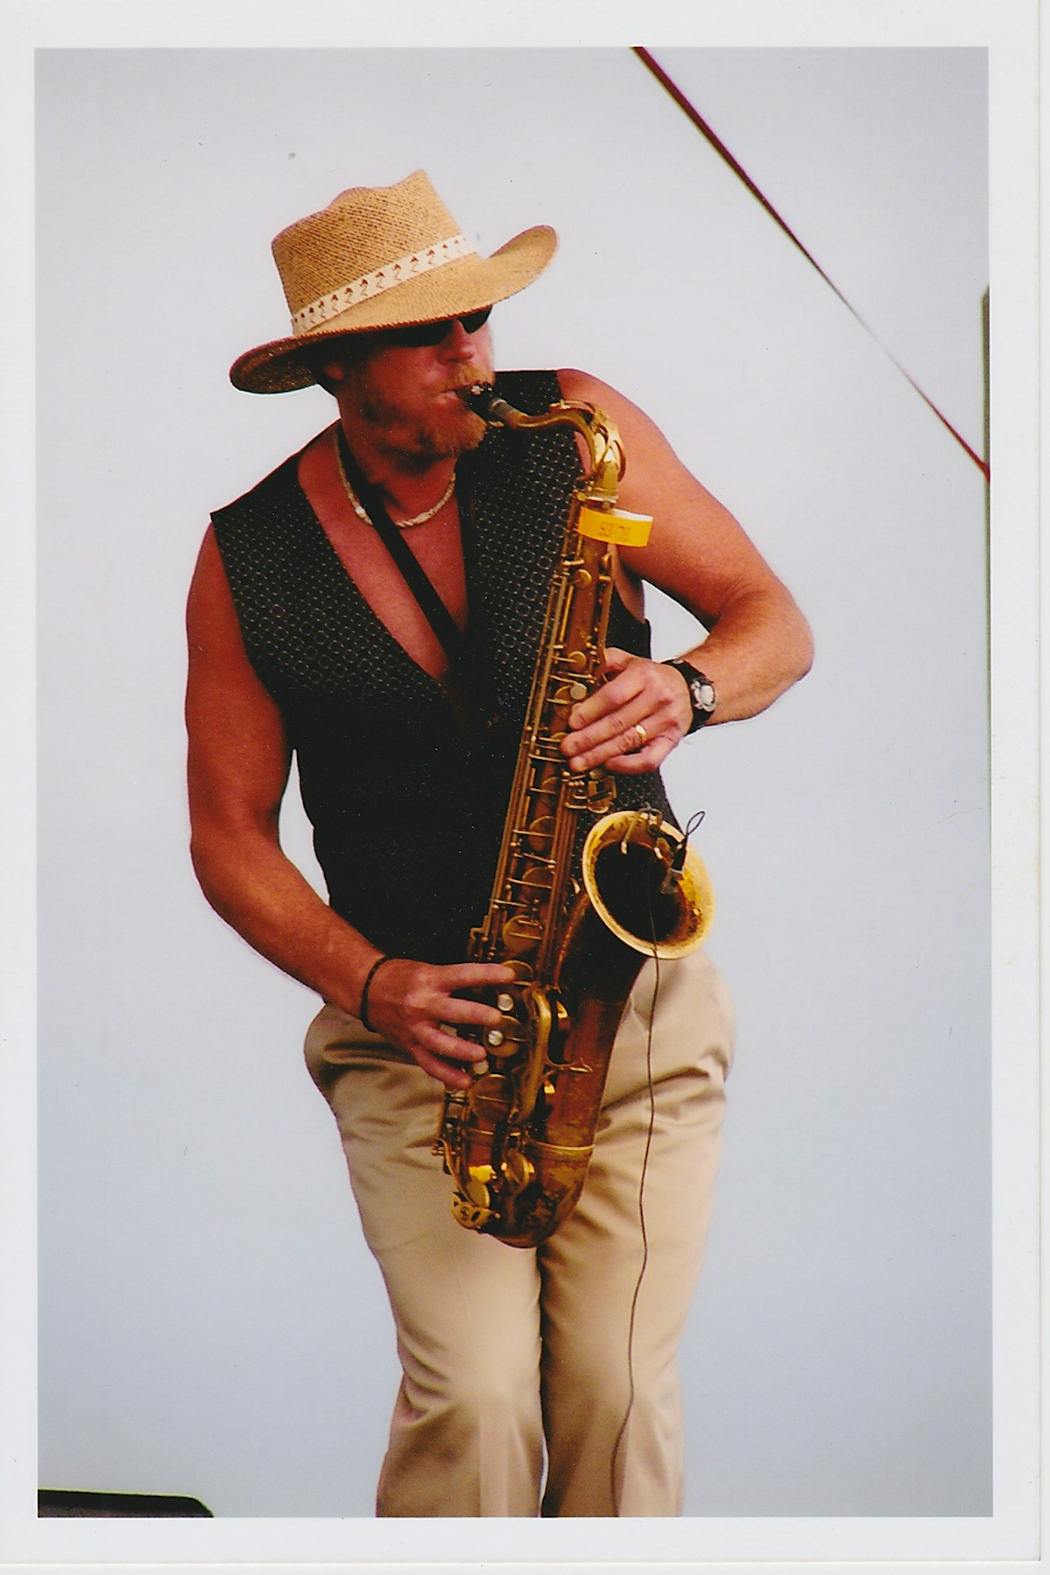 Pat Mackin played saxophone for all sorts of bands, from jazz and R&B to funk and country.